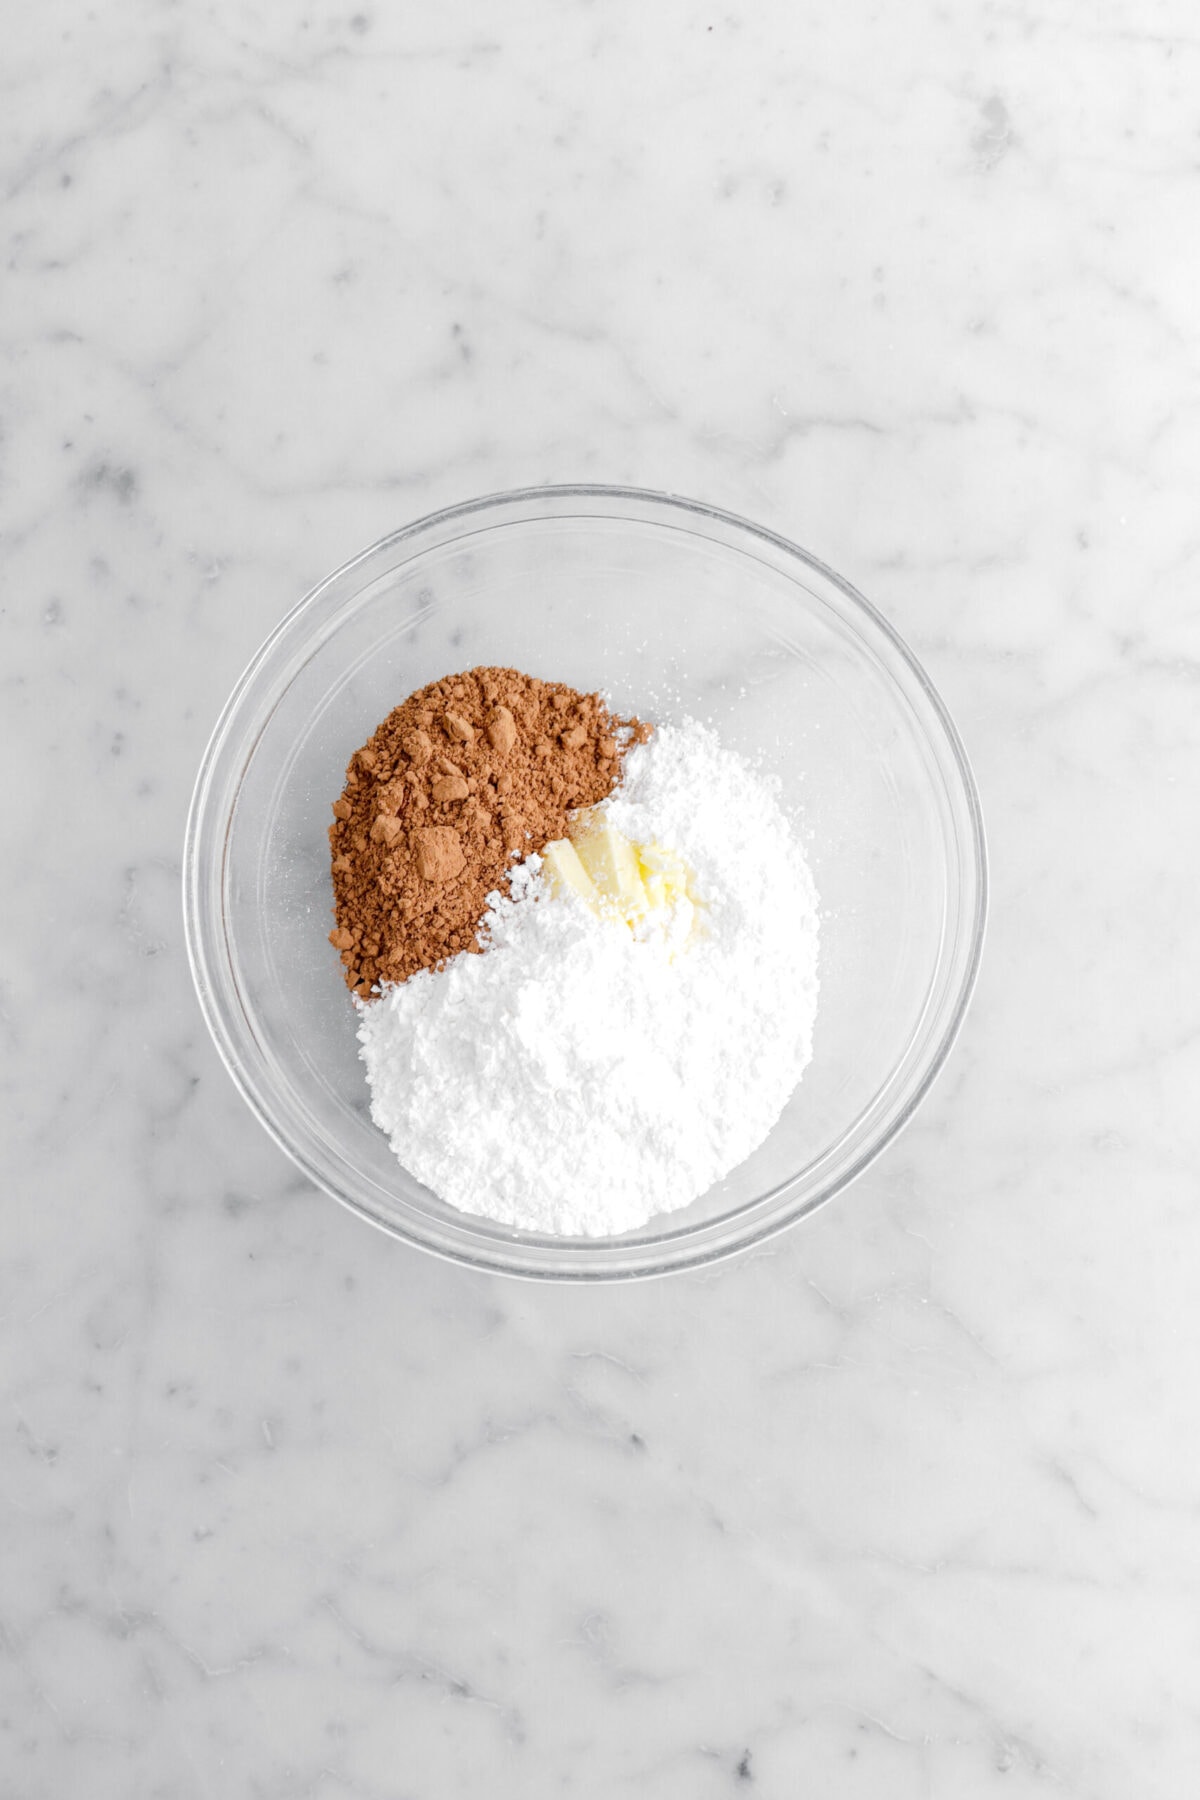 cocoa powder, butter, and powdered sugar in glass bowl.